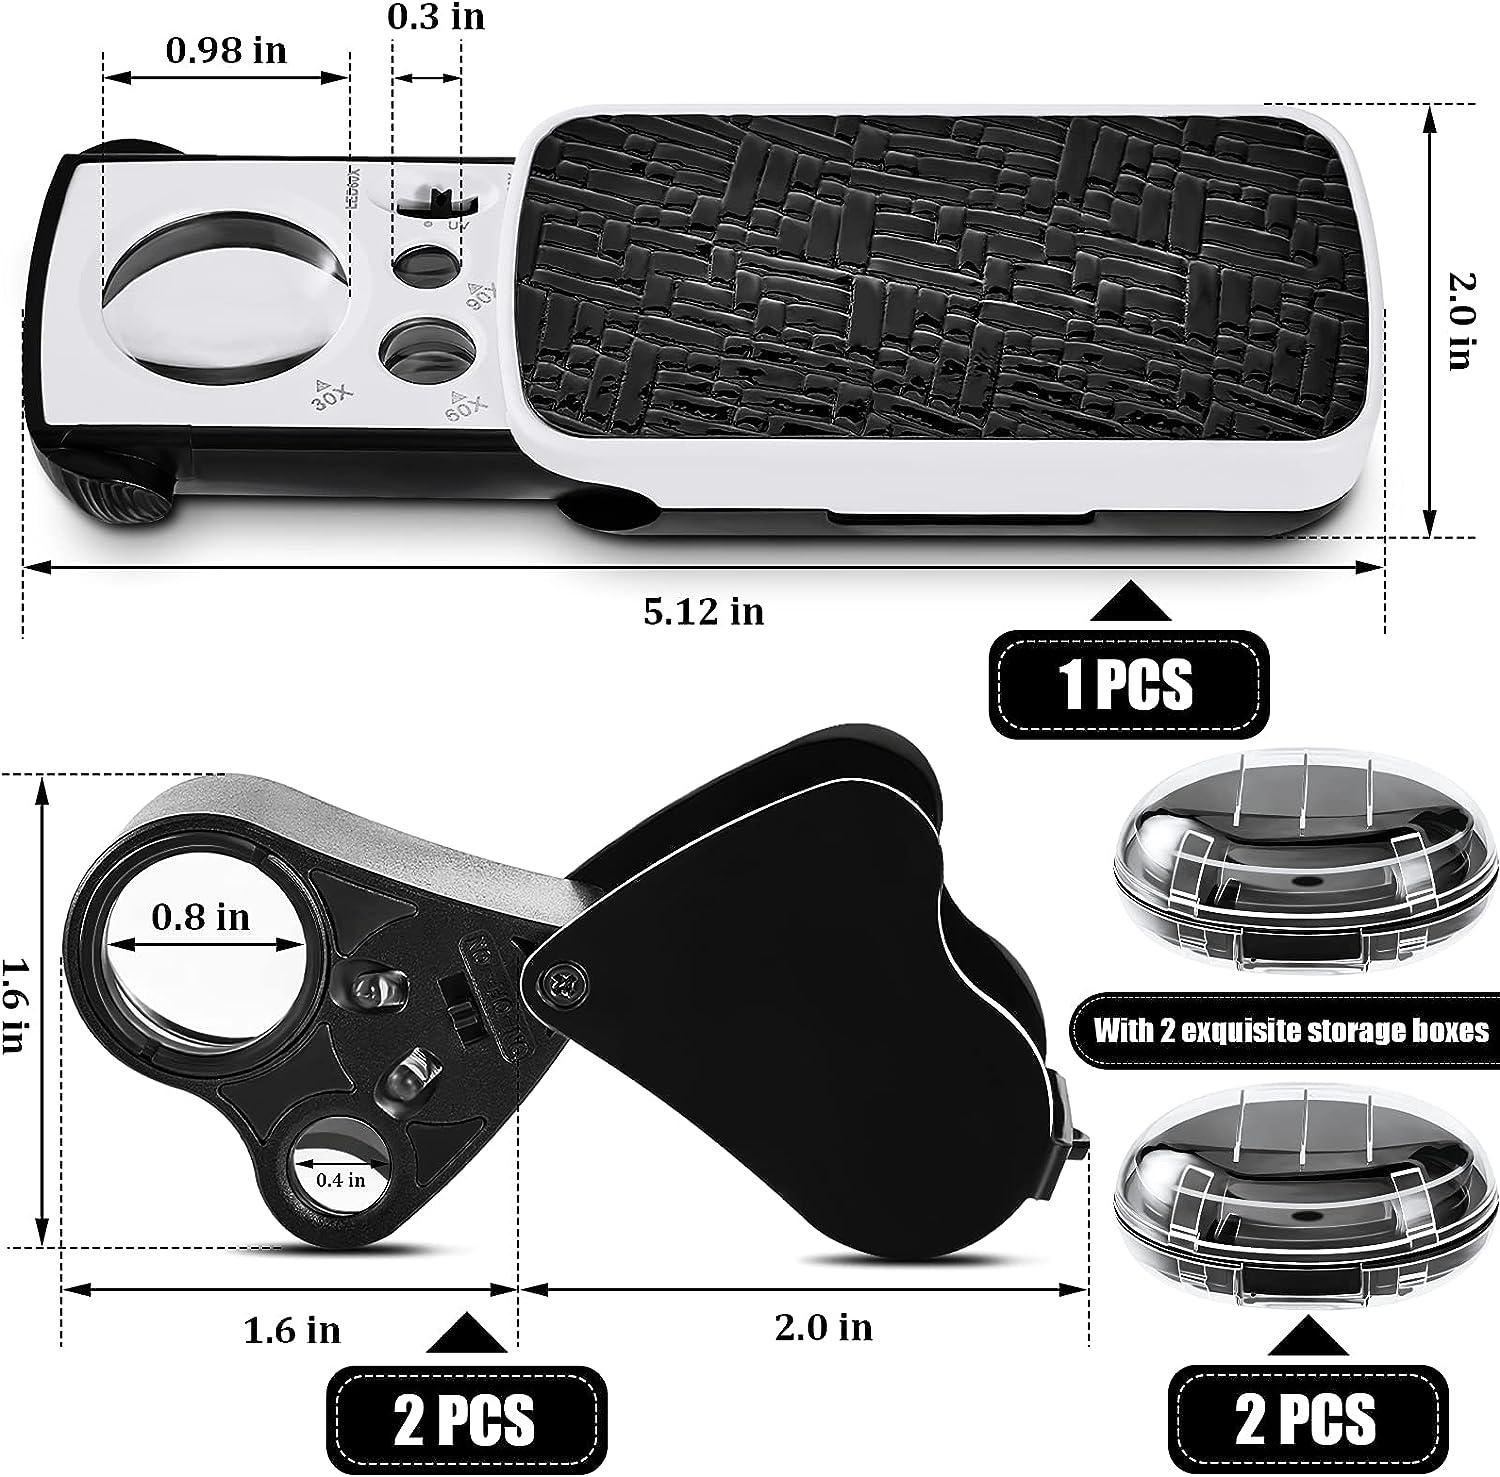 LED Slide Out Pop Up Pocket Magnifying Glass 30X, 60X, 90X, UV Light,  Jewelers Loupe, Stamps, Coins, Gems